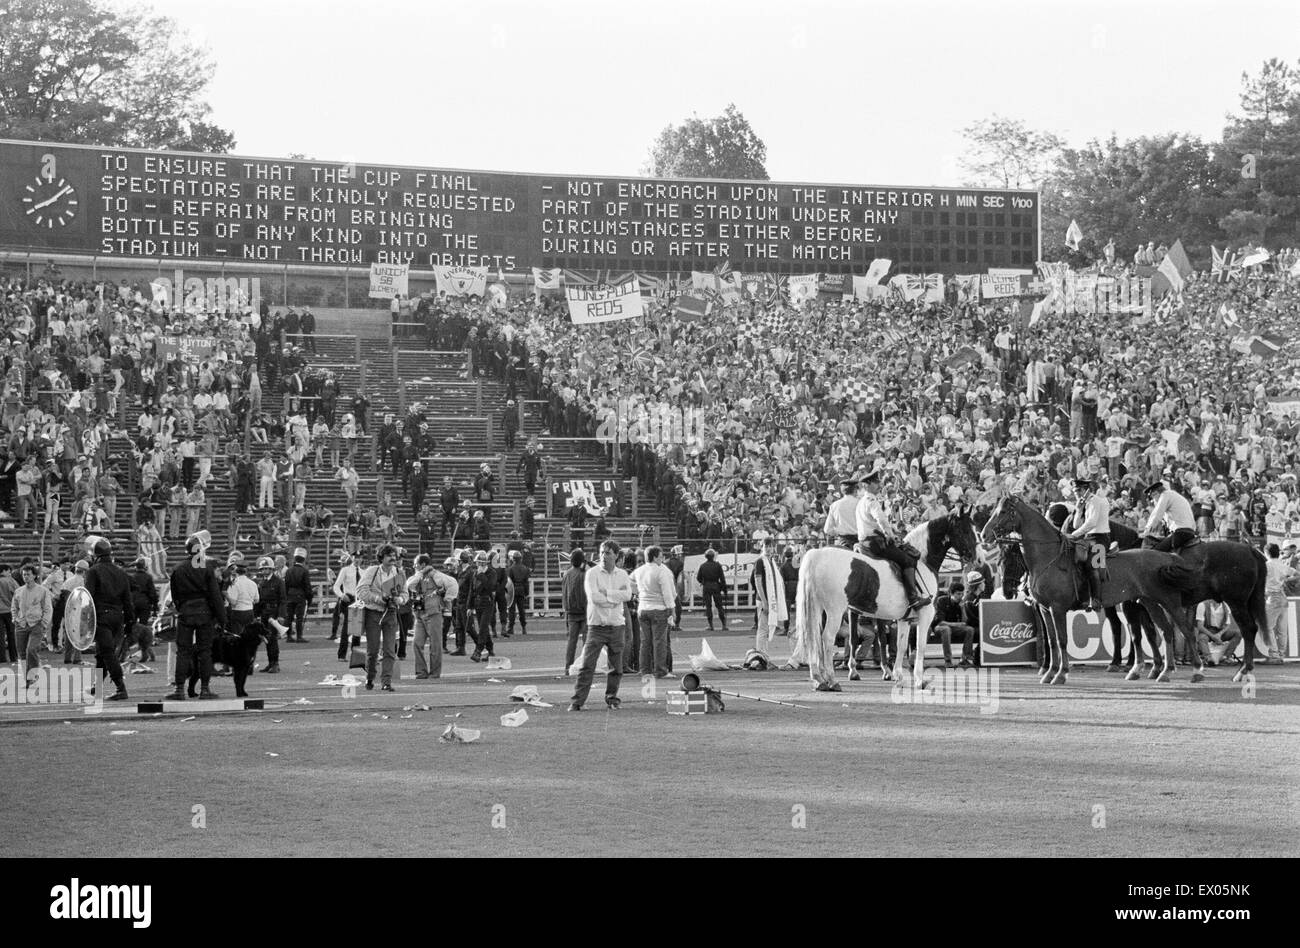 Juventus 1-0 Liverpool, 1985 European Cup Final, Heysel Stadium, Brussels, Wednesday 29th May 1985. Crowd Violence. Scoreboard. Stock Photo